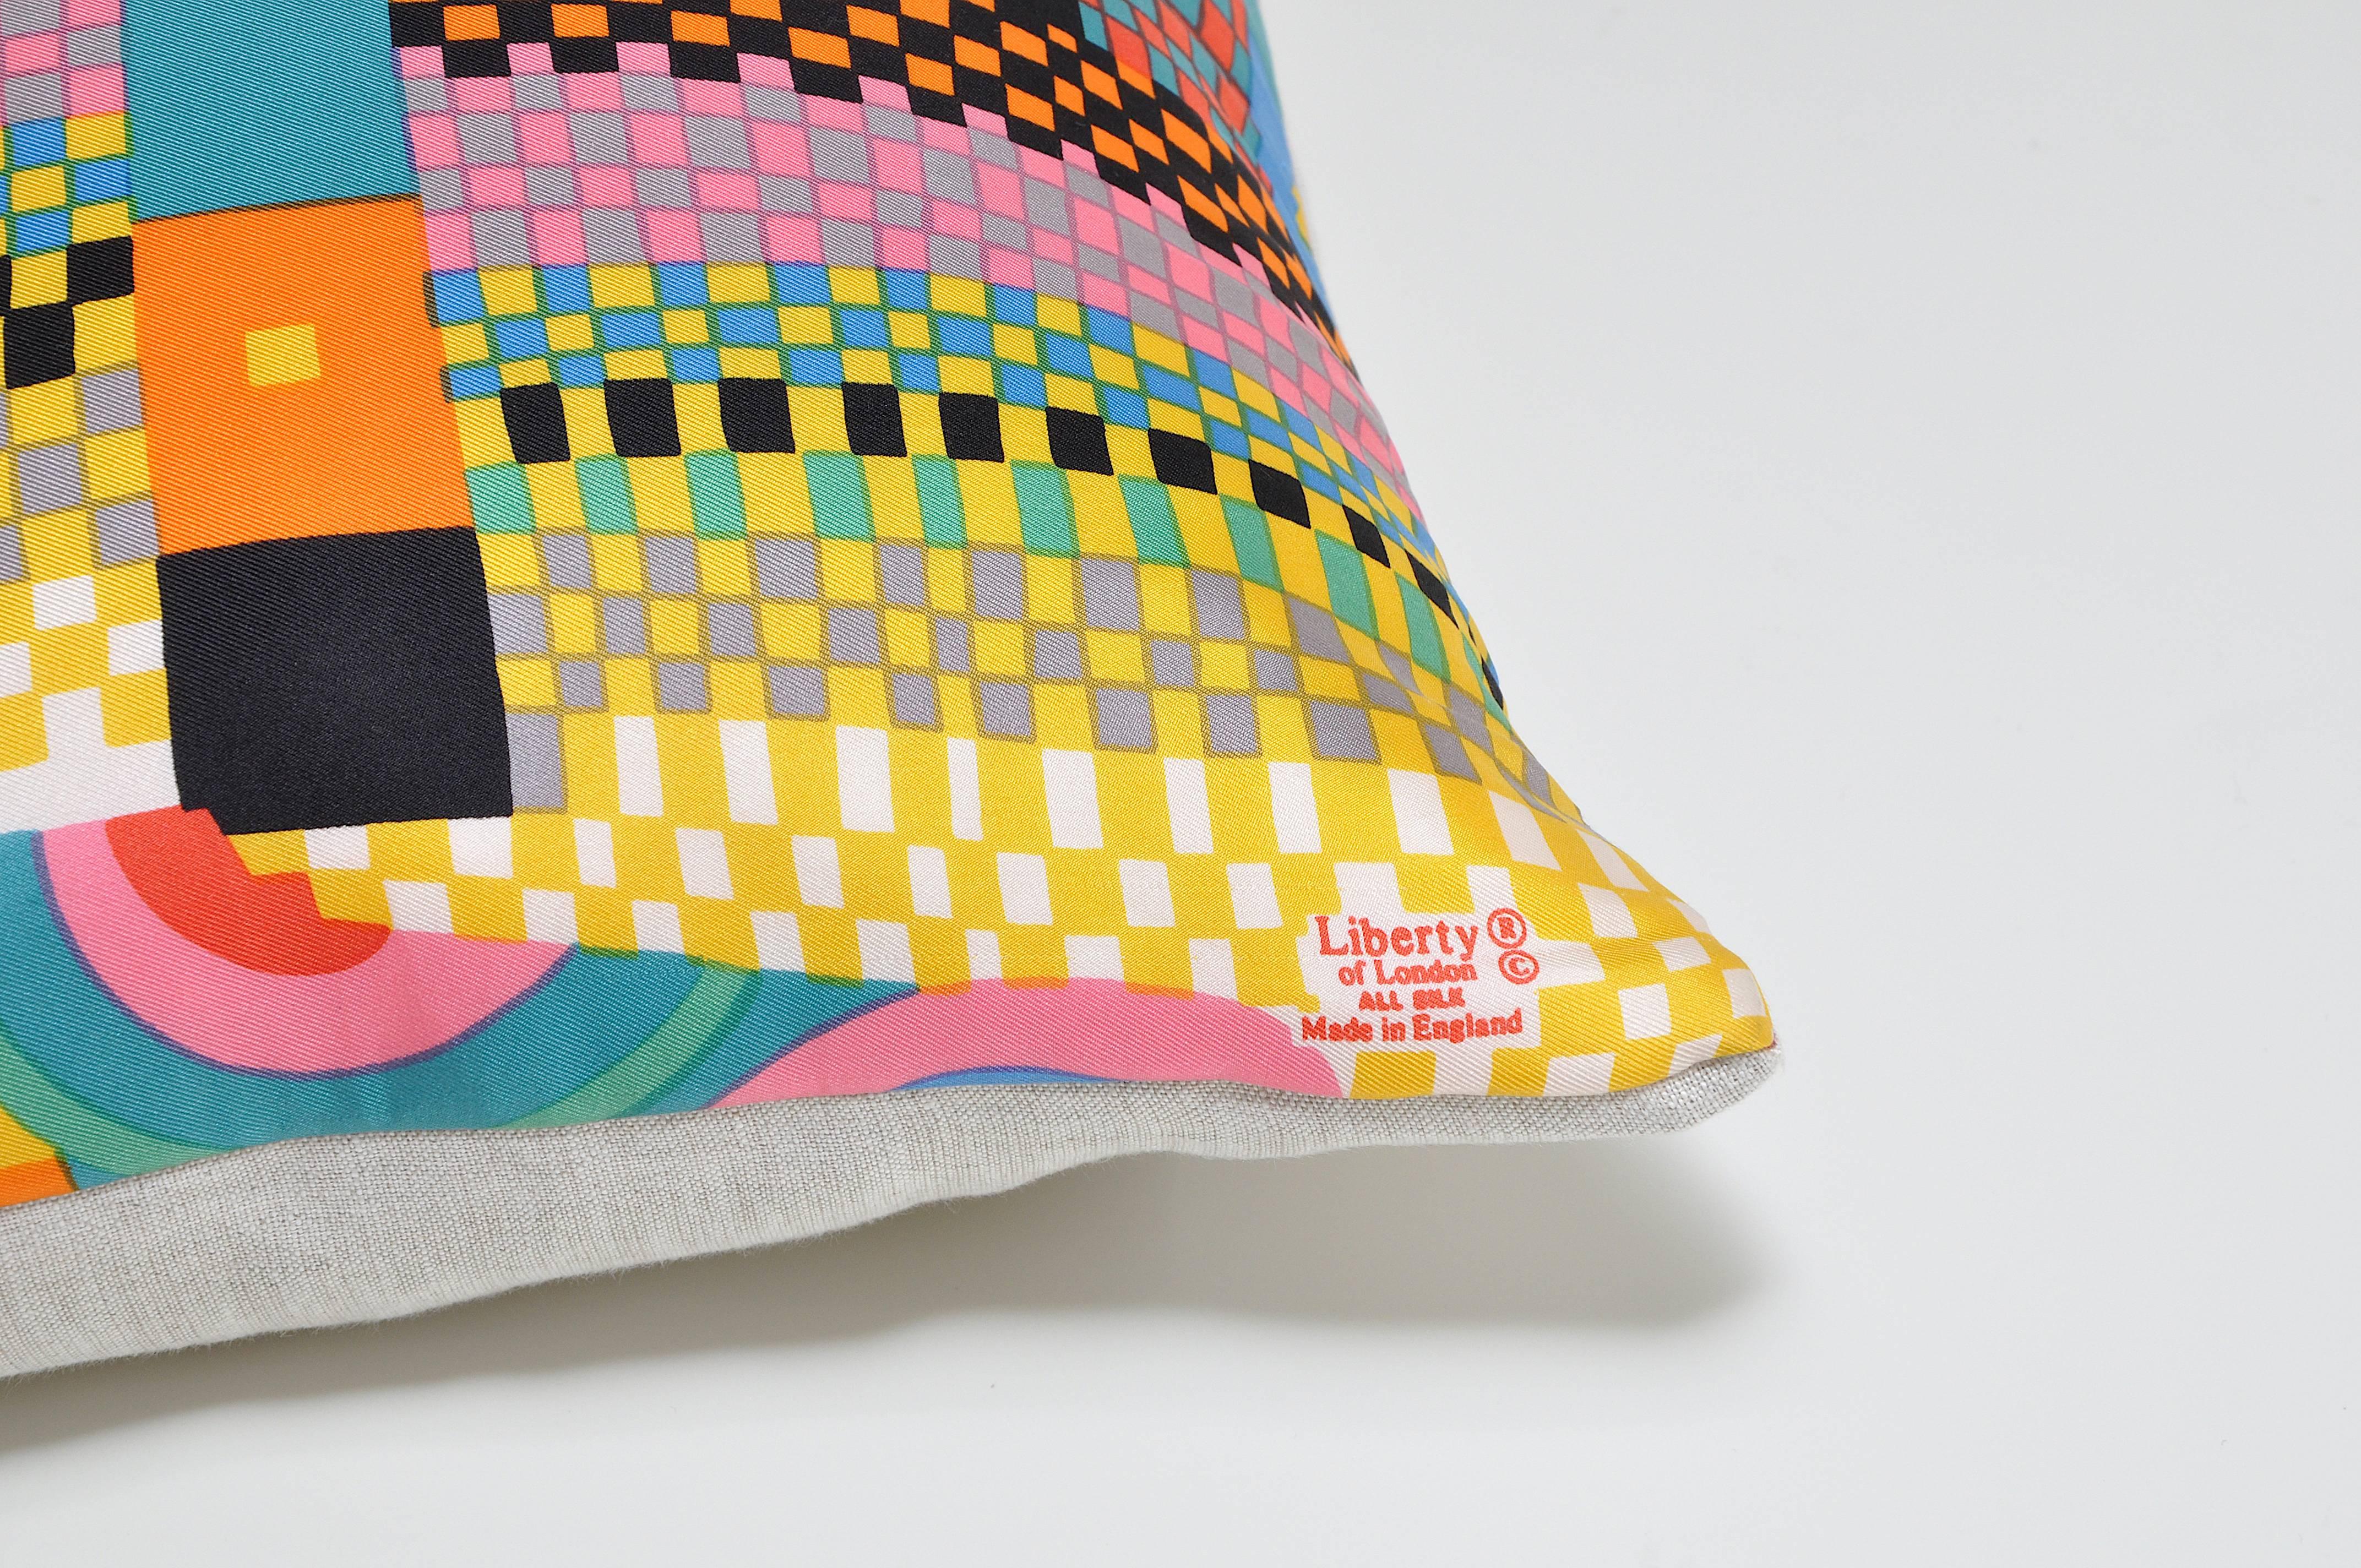 Custom-made one-of-a-kind cushion (pillow) created from an exquisite, circa late 1970s vintage silk Liberty of London fashion scarf in a bright multi-colored geometric pattern. Squares, stripes, chequered sections and wavy lines all make up an